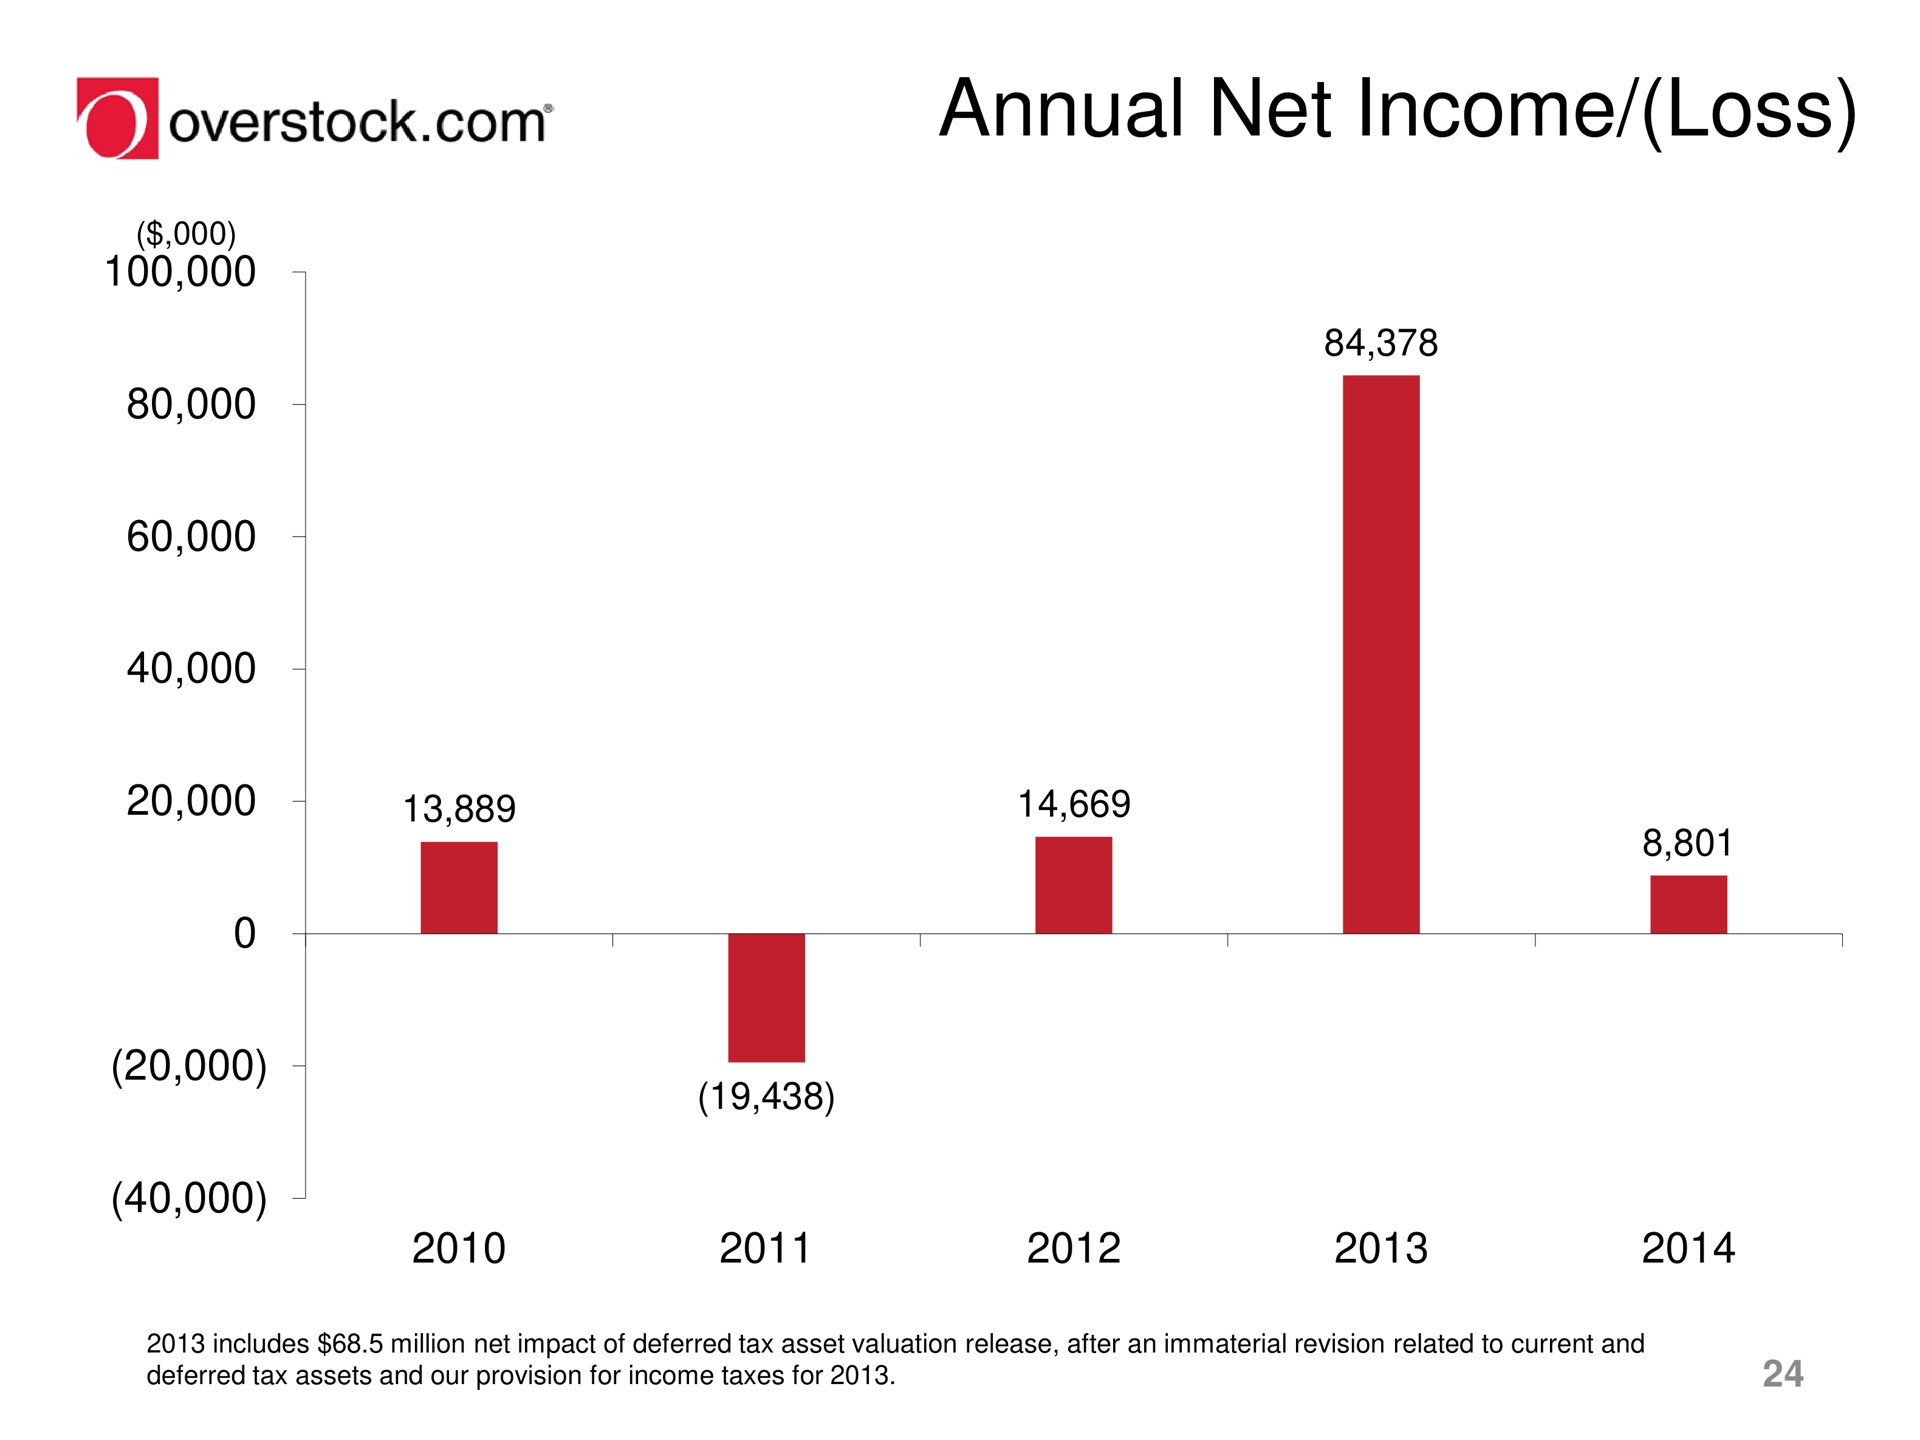 annual net income loss overstock a a i | Overstock